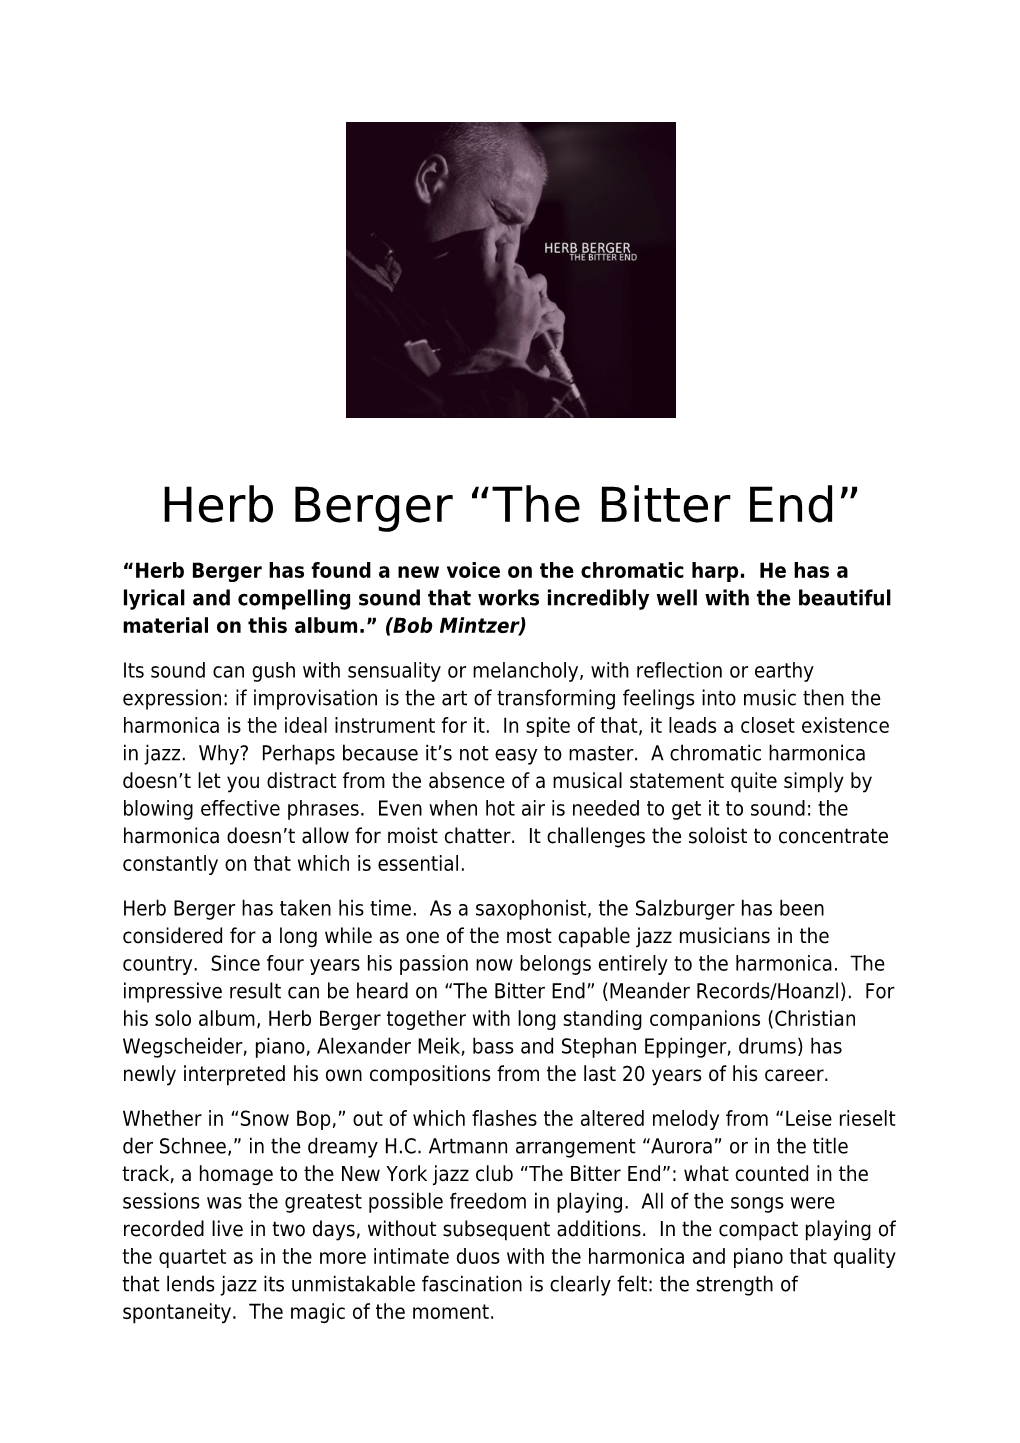 Herb Berger the Bitter End